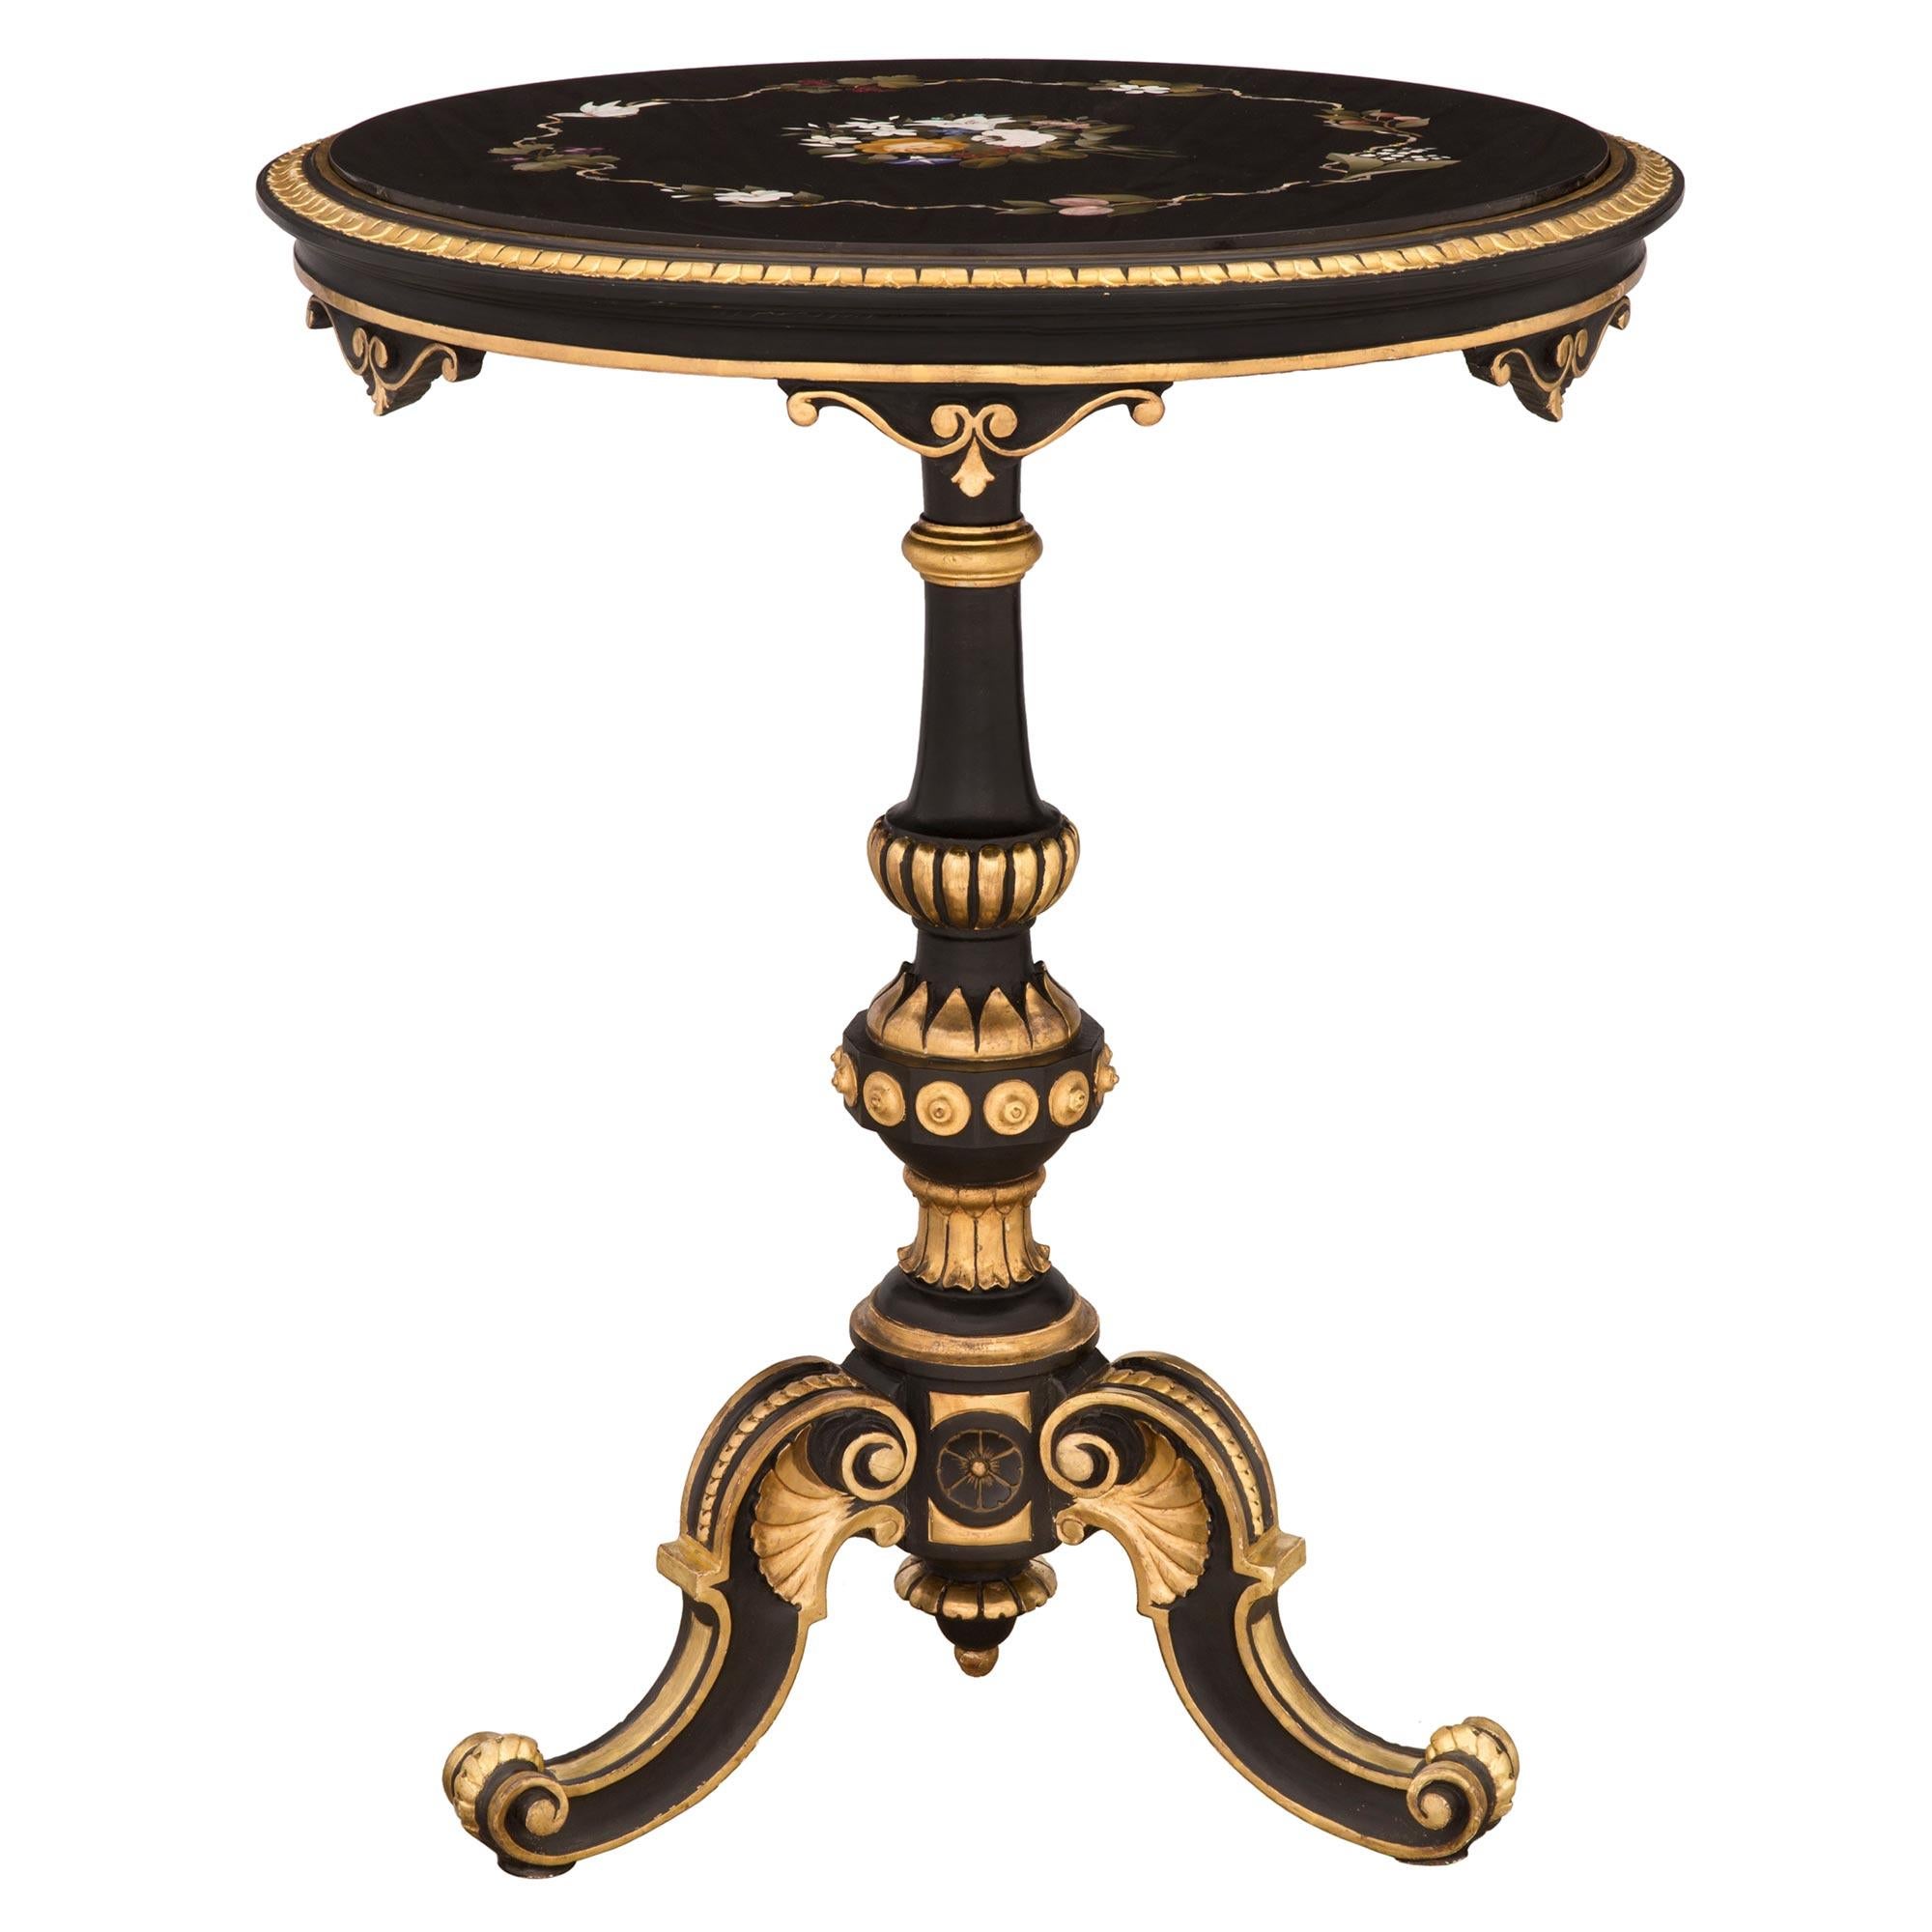 A stunning Italian early 19th century giltwood, polychrome and Pietra Dura marble Florentine side table. The table is raised by three scrolled polychrome legs with beautiful giltwood fillets and carved foliate accents. The central support displays a